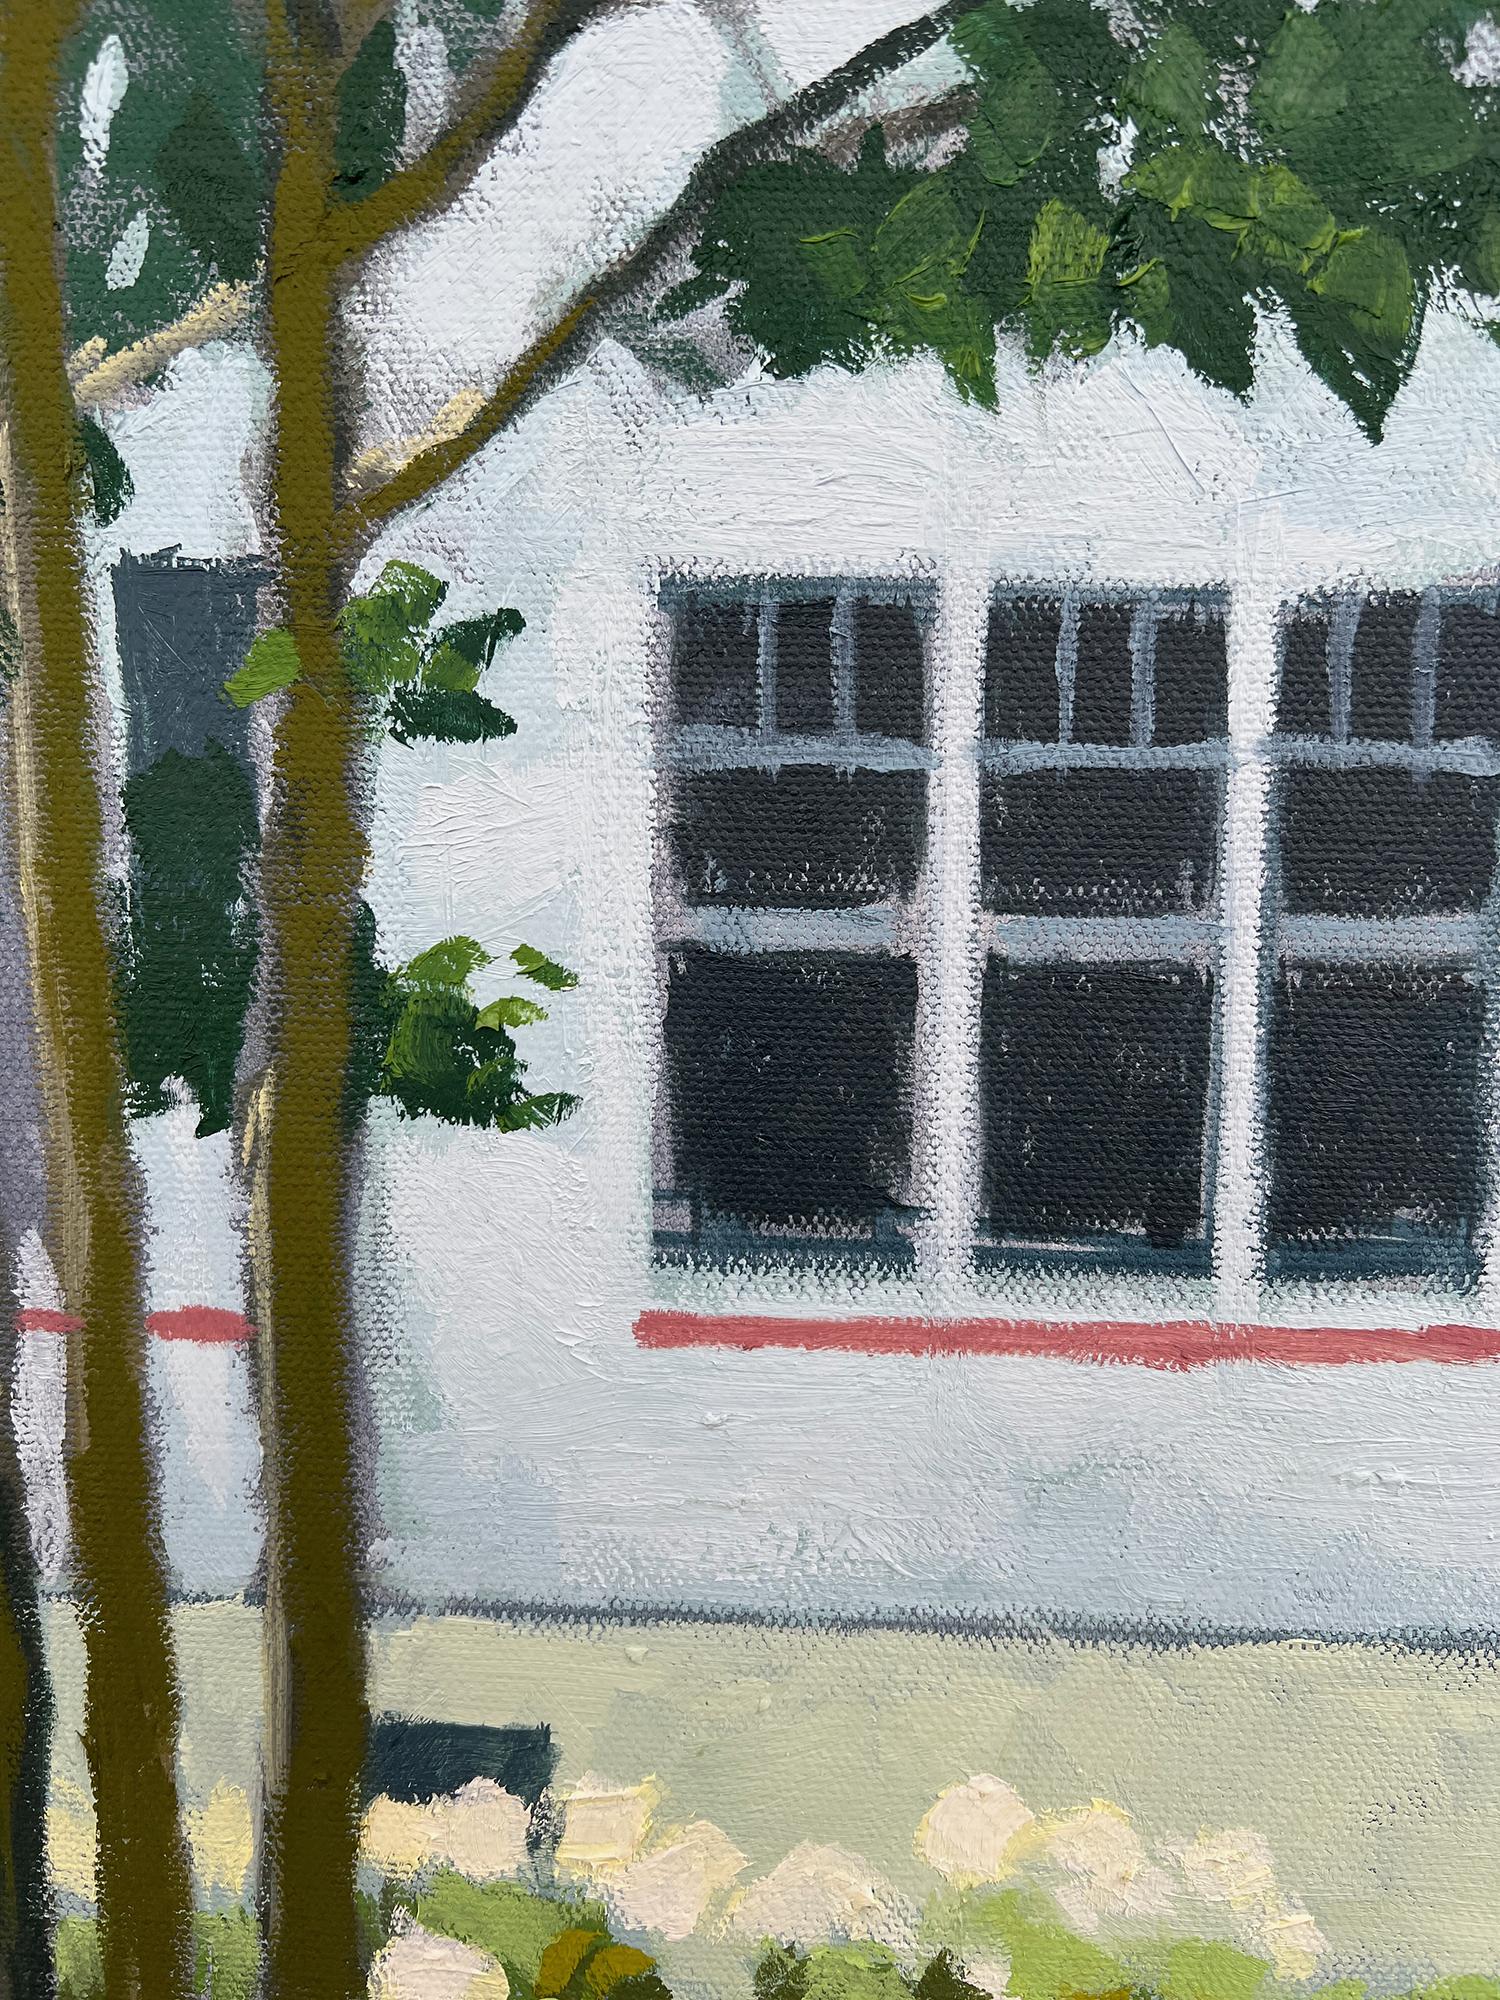 <p>Artist Comments<br>Somewhere in Cape May, New Jersey, a pale blue house stands as an inviting retreat on a summer afternoon. Bathed in the soft glow of natural light and enriched by shadows, the surrounding greens come alive in this picturesque